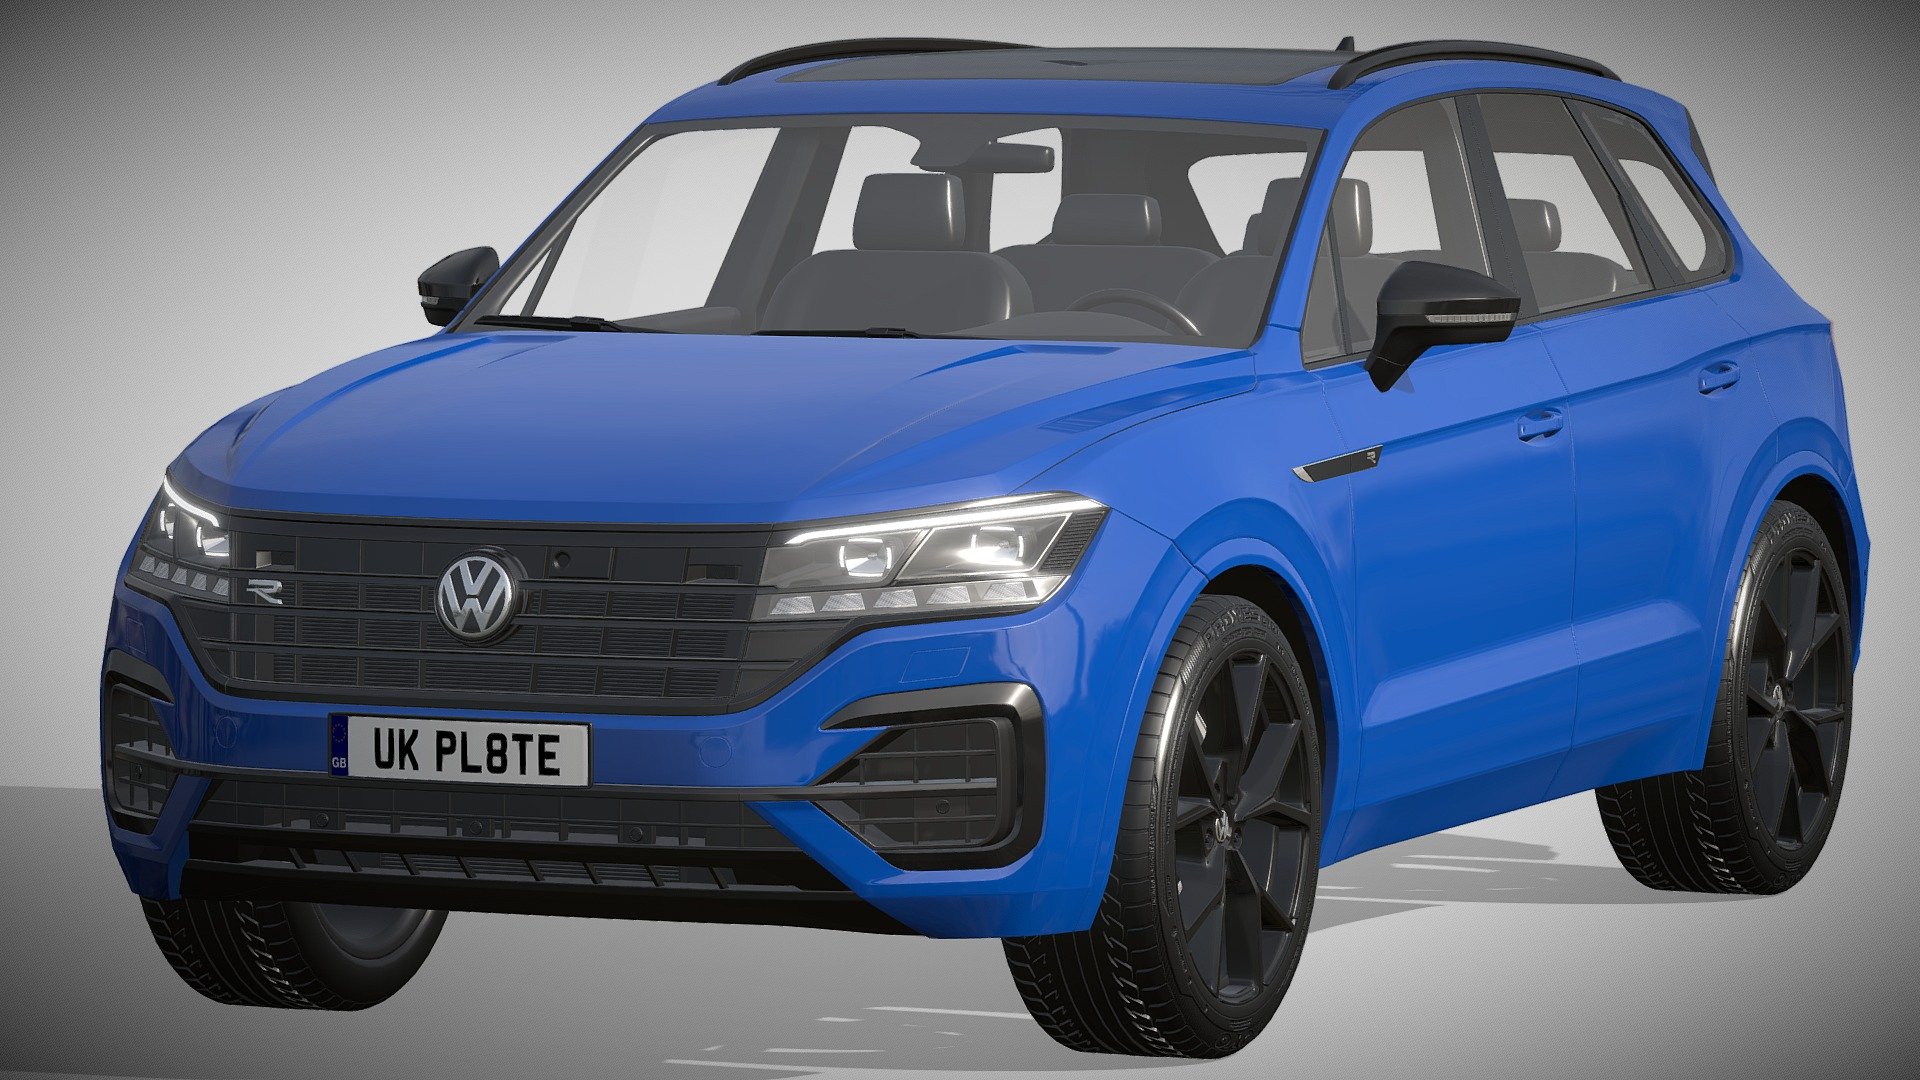 Volkswagen Touareg R 2021

https://www.volkswagen.co.uk/en/new/touareg-r.html

Clean geometry Light weight model, yet completely detailed for HI-Res renders. Use for movies, Advertisements or games

Corona render and materials

All textures include in *.rar files

Lighting setup is not included in the file! - Volkswagen Touareg R 2021 - Buy Royalty Free 3D model by zifir3d 3d model